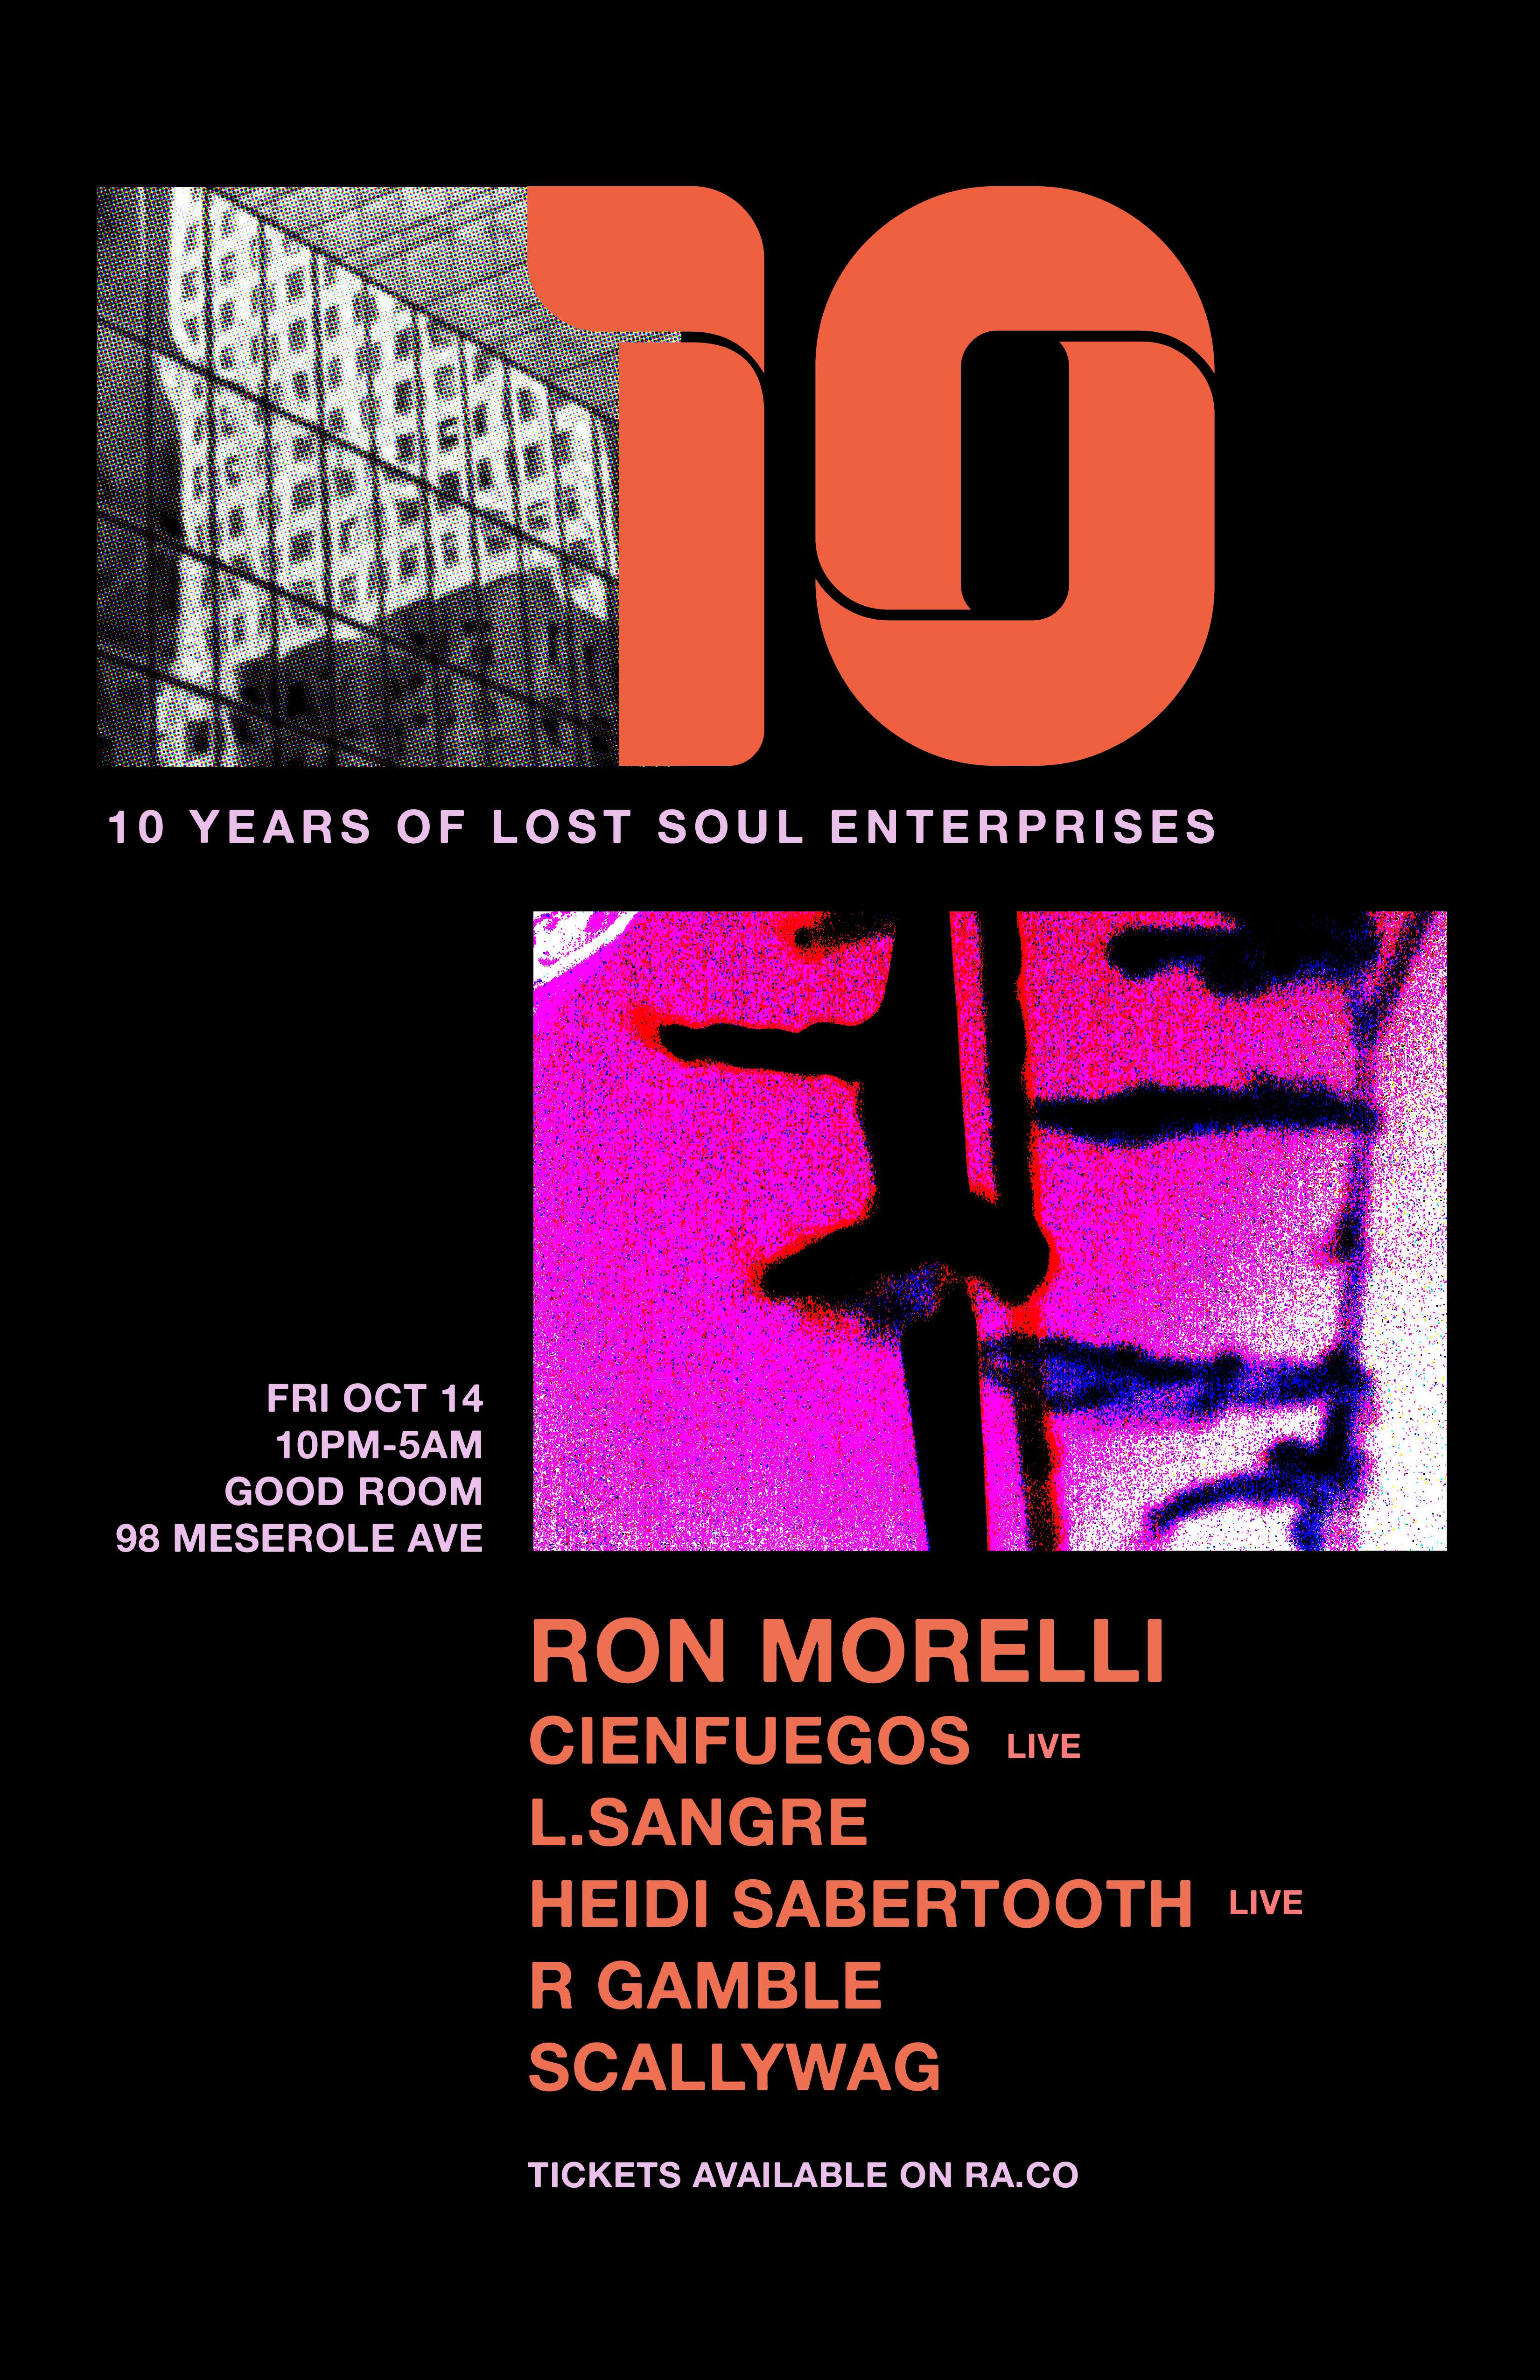 10 Years of Lost Soul Enterprises with Ron Morelli, Cienfuegos, L.Sangre + more  - フライヤー表